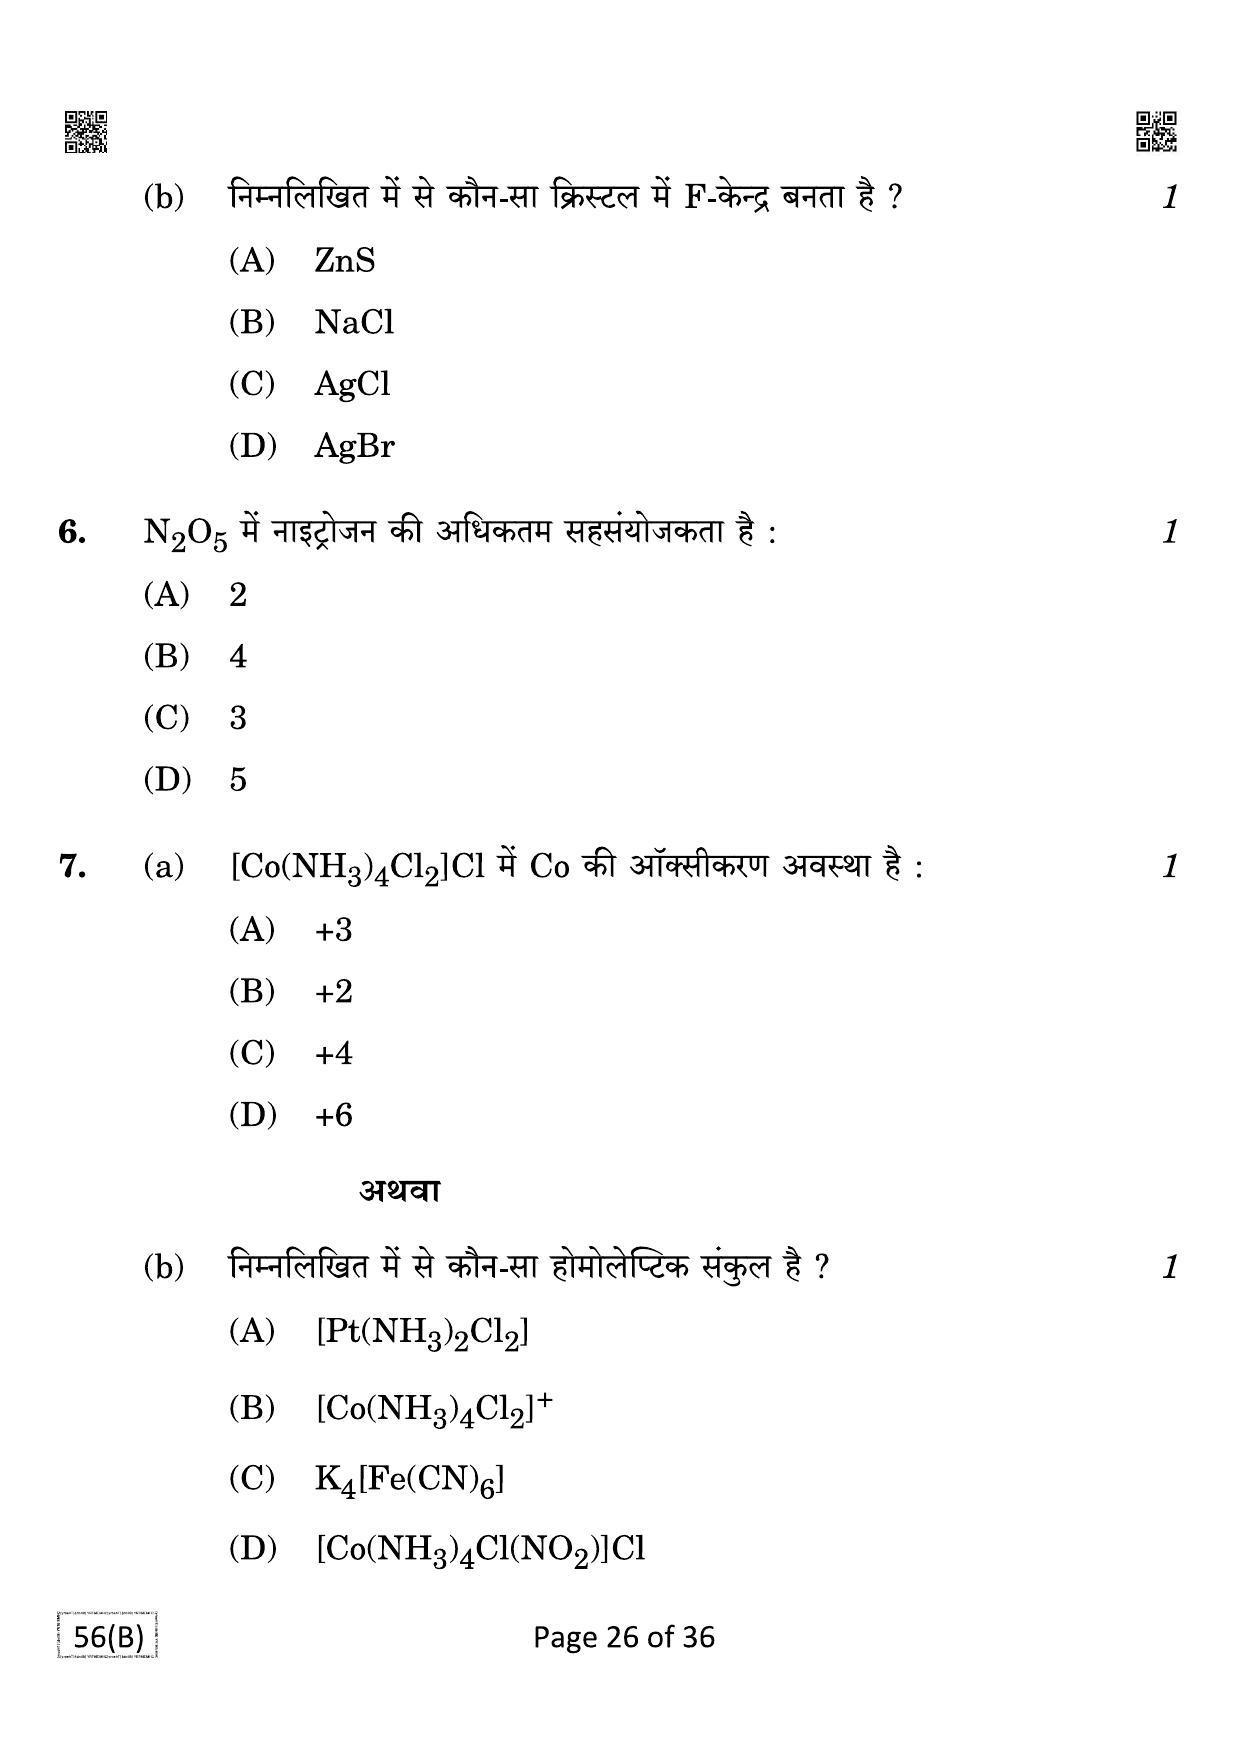 CBSE Class 12 QP_043_CHEMISTRY_FOR_BLIND_CANDIDATES 2021 Compartment Question Paper - Page 26